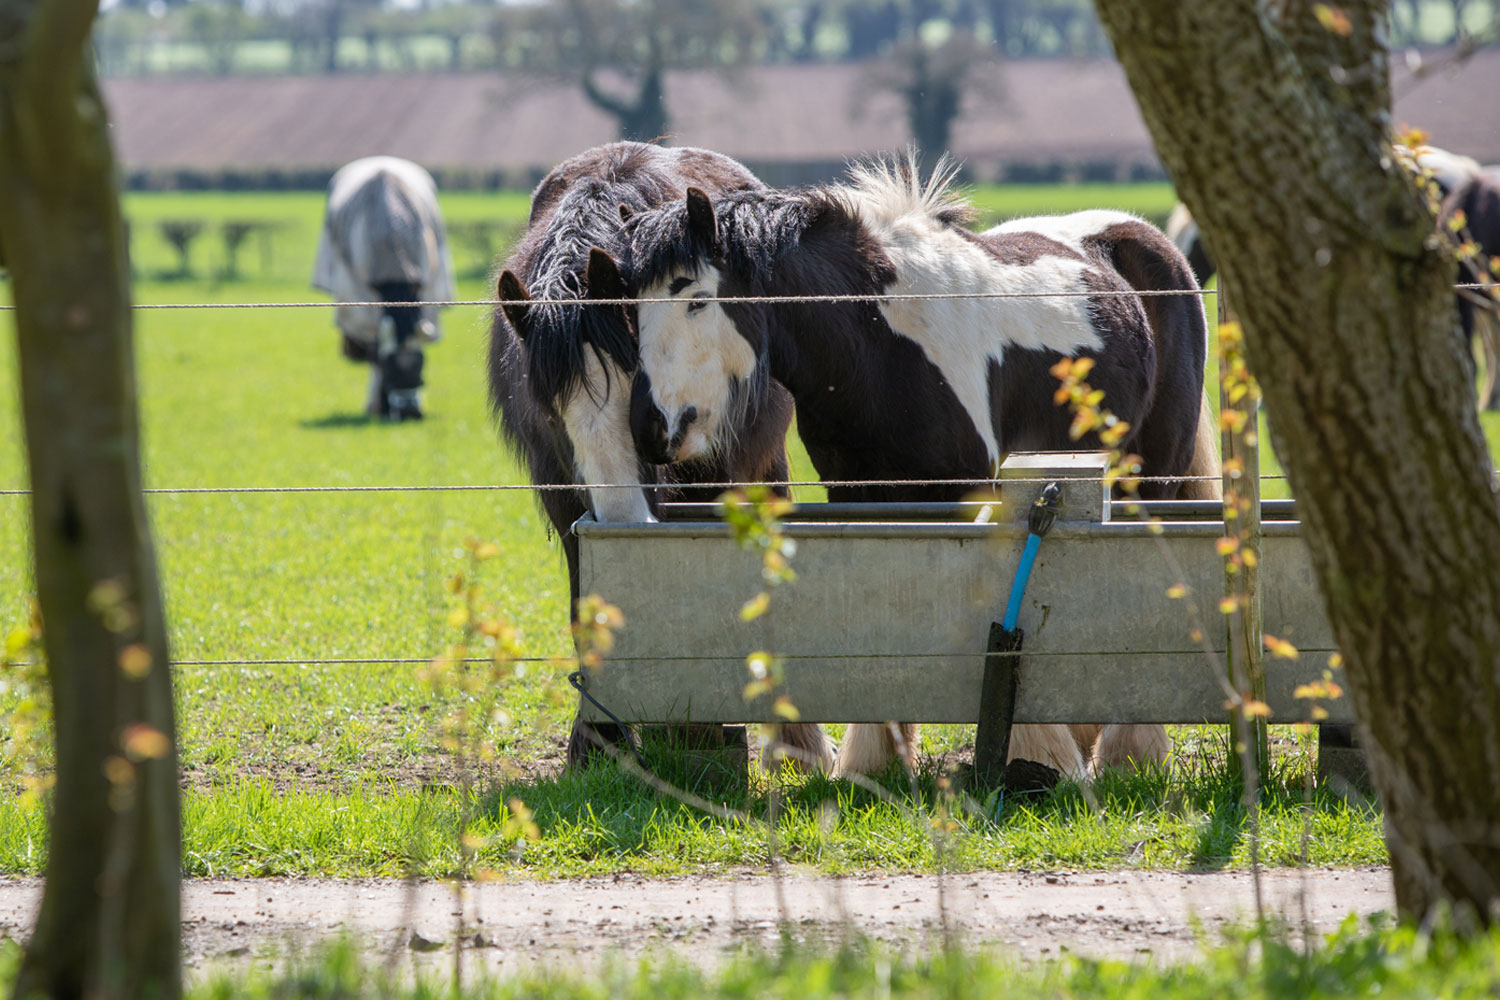 Is a client struggling to care for their horse?